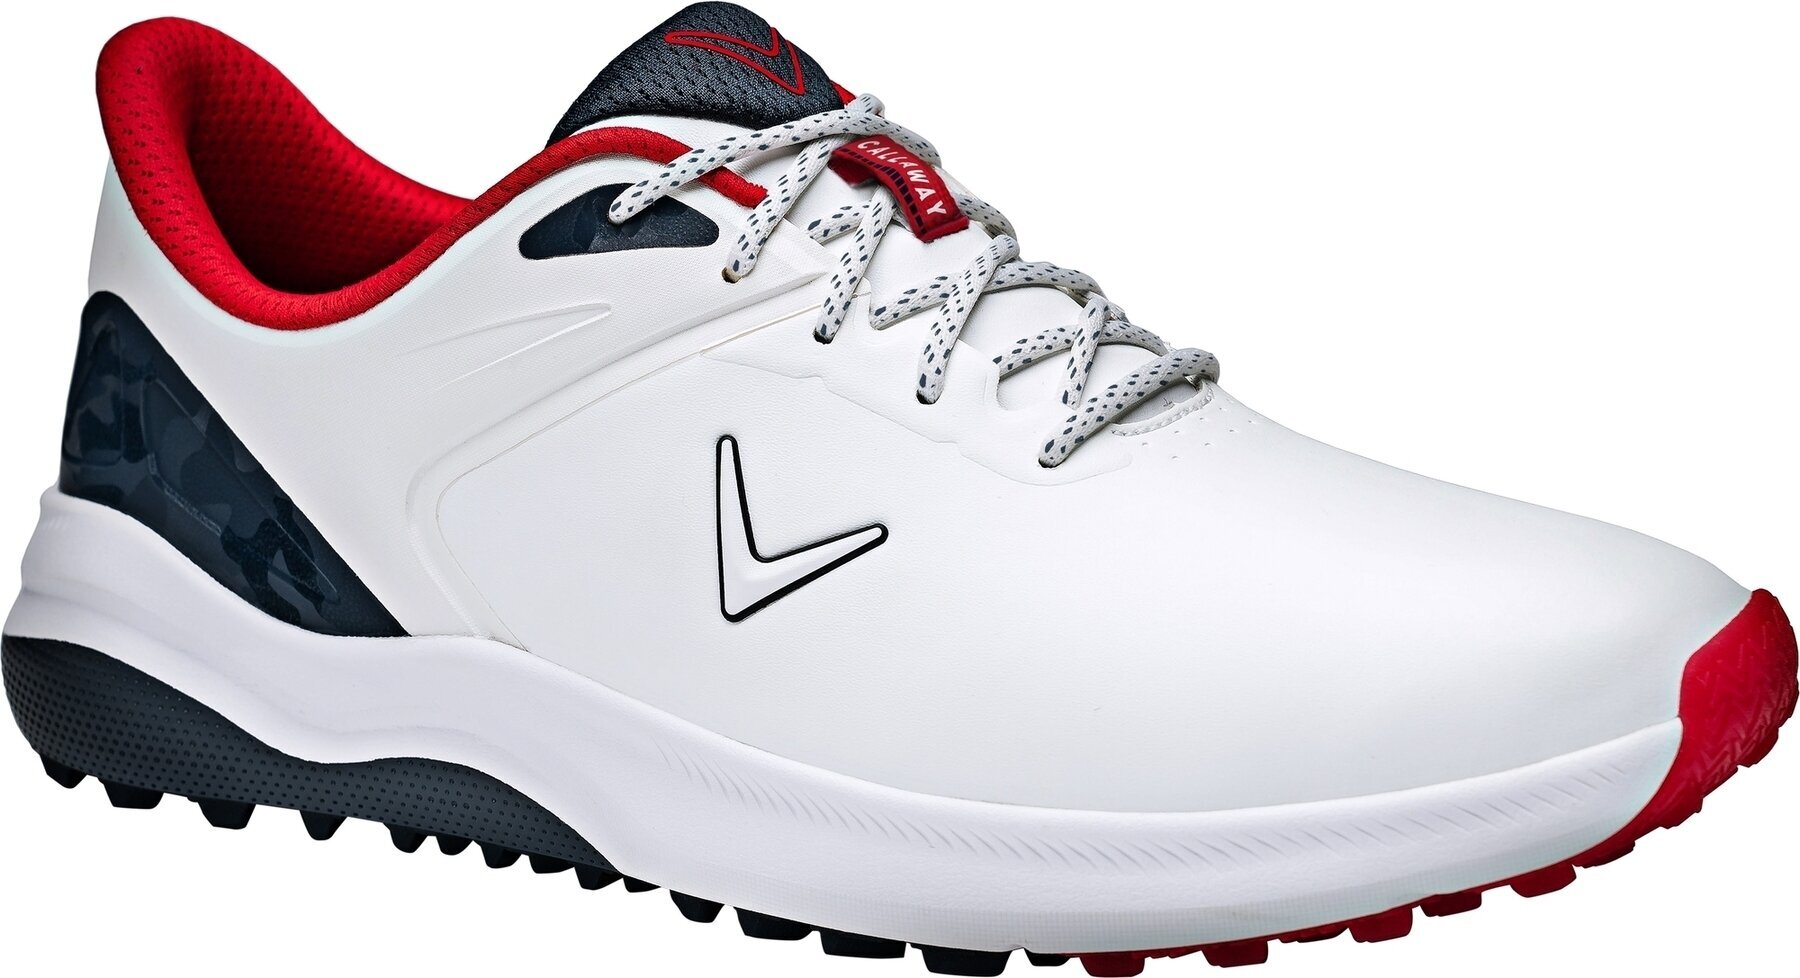 Chaussures de golf pour hommes Callaway Lazer Mens Golf Shoes White/Navy/Red 43